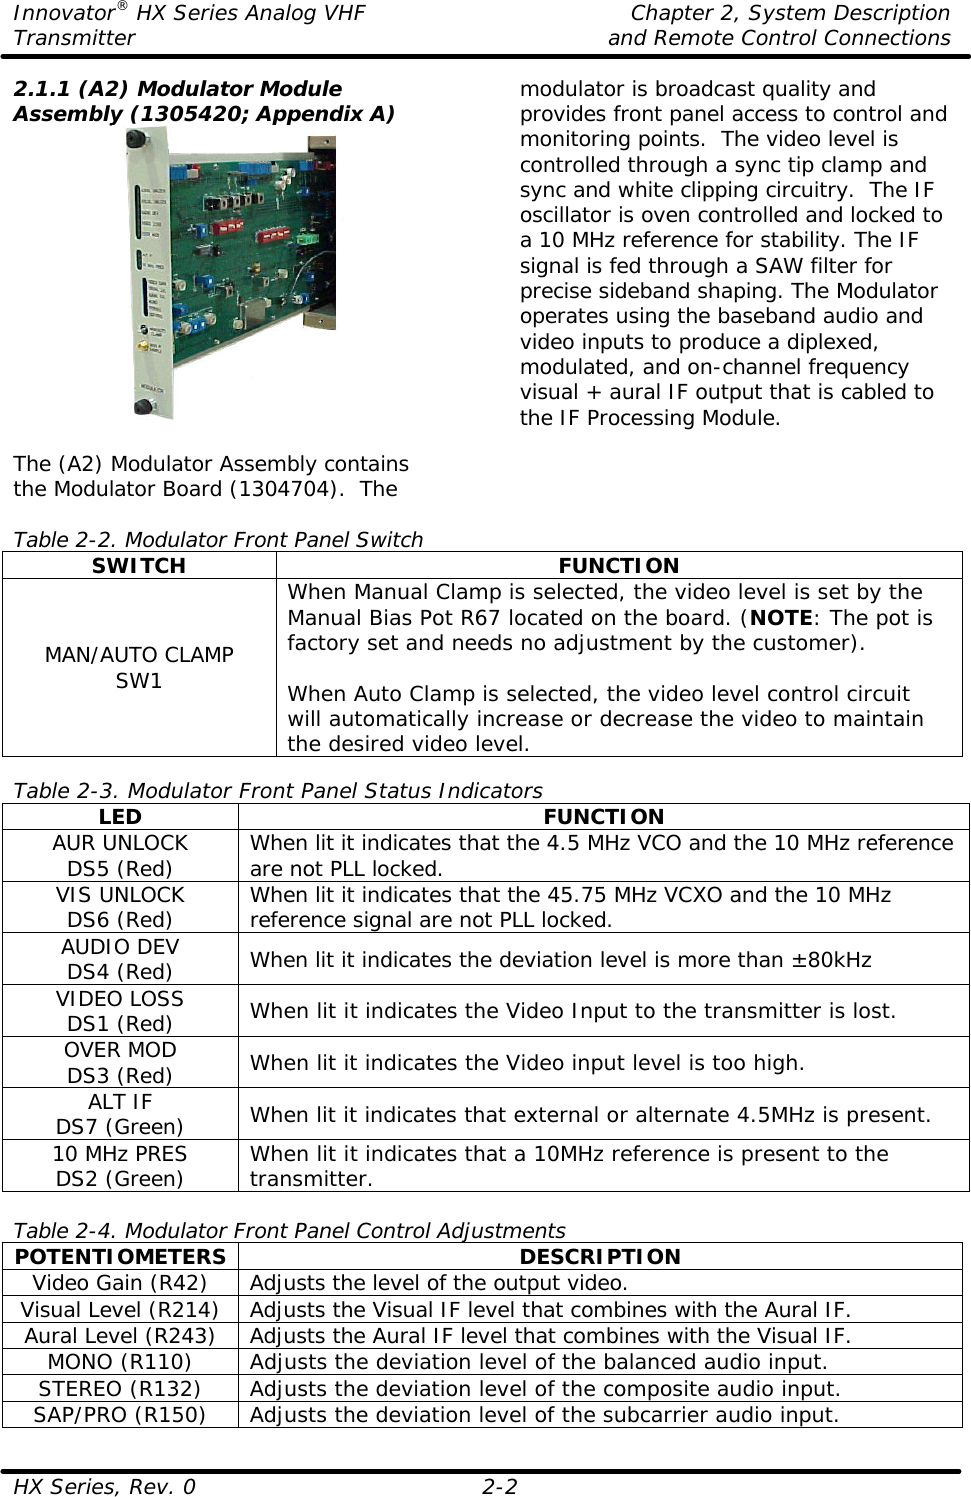 Innovator® HX Series Analog VHF    Chapter 2, System Description Transmitter    and Remote Control Connections  HX Series, Rev. 0 2-2 2.1.1 (A2) Modulator Module Assembly (1305420; Appendix A)   The (A2) Modulator Assembly contains the Modulator Board (1304704).  The modulator is broadcast quality and provides front panel access to control and monitoring points.  The video level is controlled through a sync tip clamp and sync and white clipping circuitry.  The IF oscillator is oven controlled and locked to a 10 MHz reference for stability. The IF signal is fed through a SAW filter for precise sideband shaping. The Modulator operates using the baseband audio and video inputs to produce a diplexed, modulated, and on-channel frequency visual + aural IF output that is cabled to the IF Processing Module.   Table 2-2. Modulator Front Panel Switch SWITCH FUNCTION MAN/AUTO CLAMP SW1 When Manual Clamp is selected, the video level is set by the Manual Bias Pot R67 located on the board. (NOTE: The pot is factory set and needs no adjustment by the customer).  When Auto Clamp is selected, the video level control circuit will automatically increase or decrease the video to maintain the desired video level.  Table 2-3. Modulator Front Panel Status Indicators LED FUNCTION AUR UNLOCK DS5 (Red) When lit it indicates that the 4.5 MHz VCO and the 10 MHz reference are not PLL locked. VIS UNLOCK DS6 (Red) When lit it indicates that the 45.75 MHz VCXO and the 10 MHz reference signal are not PLL locked. AUDIO DEV DS4 (Red) When lit it indicates the deviation level is more than ±80kHz VIDEO LOSS DS1 (Red) When lit it indicates the Video Input to the transmitter is lost. OVER MOD DS3 (Red) When lit it indicates the Video input level is too high. ALT IF DS7 (Green) When lit it indicates that external or alternate 4.5MHz is present. 10 MHz PRES DS2 (Green) When lit it indicates that a 10MHz reference is present to the transmitter.  Table 2-4. Modulator Front Panel Control Adjustments POTENTIOMETERS DESCRIPTION Video Gain (R42) Adjusts the level of the output video. Visual Level (R214) Adjusts the Visual IF level that combines with the Aural IF. Aural Level (R243) Adjusts the Aural IF level that combines with the Visual IF. MONO (R110) Adjusts the deviation level of the balanced audio input. STEREO (R132) Adjusts the deviation level of the composite audio input. SAP/PRO (R150) Adjusts the deviation level of the subcarrier audio input. 